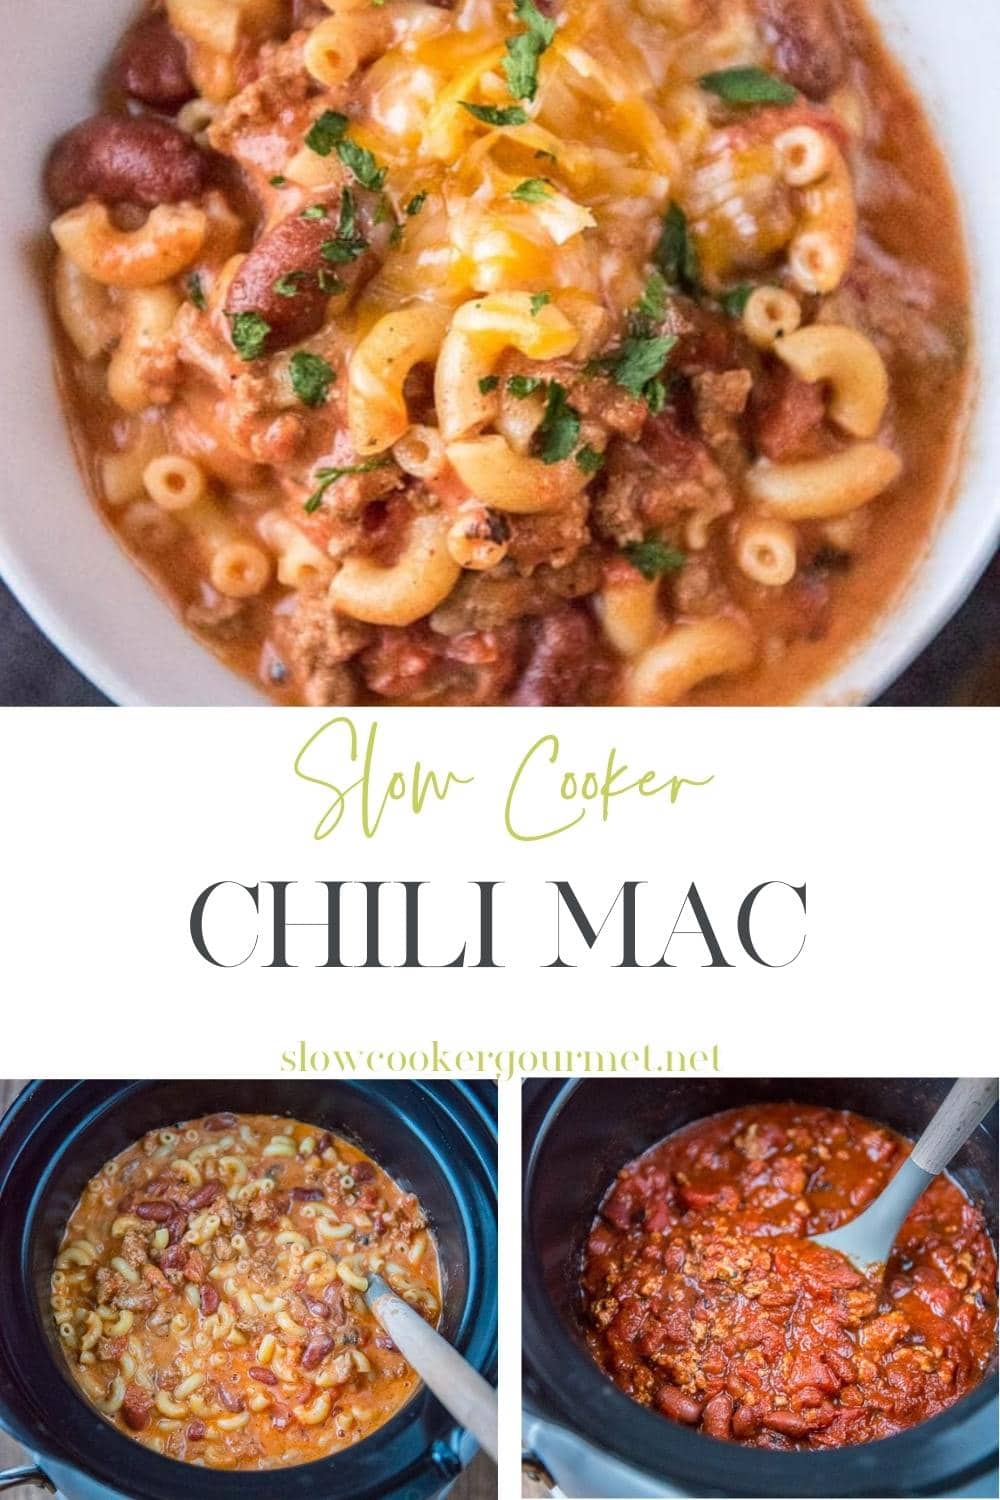 Slow Cooker Chili Mac - Slow Cooker Gourmet